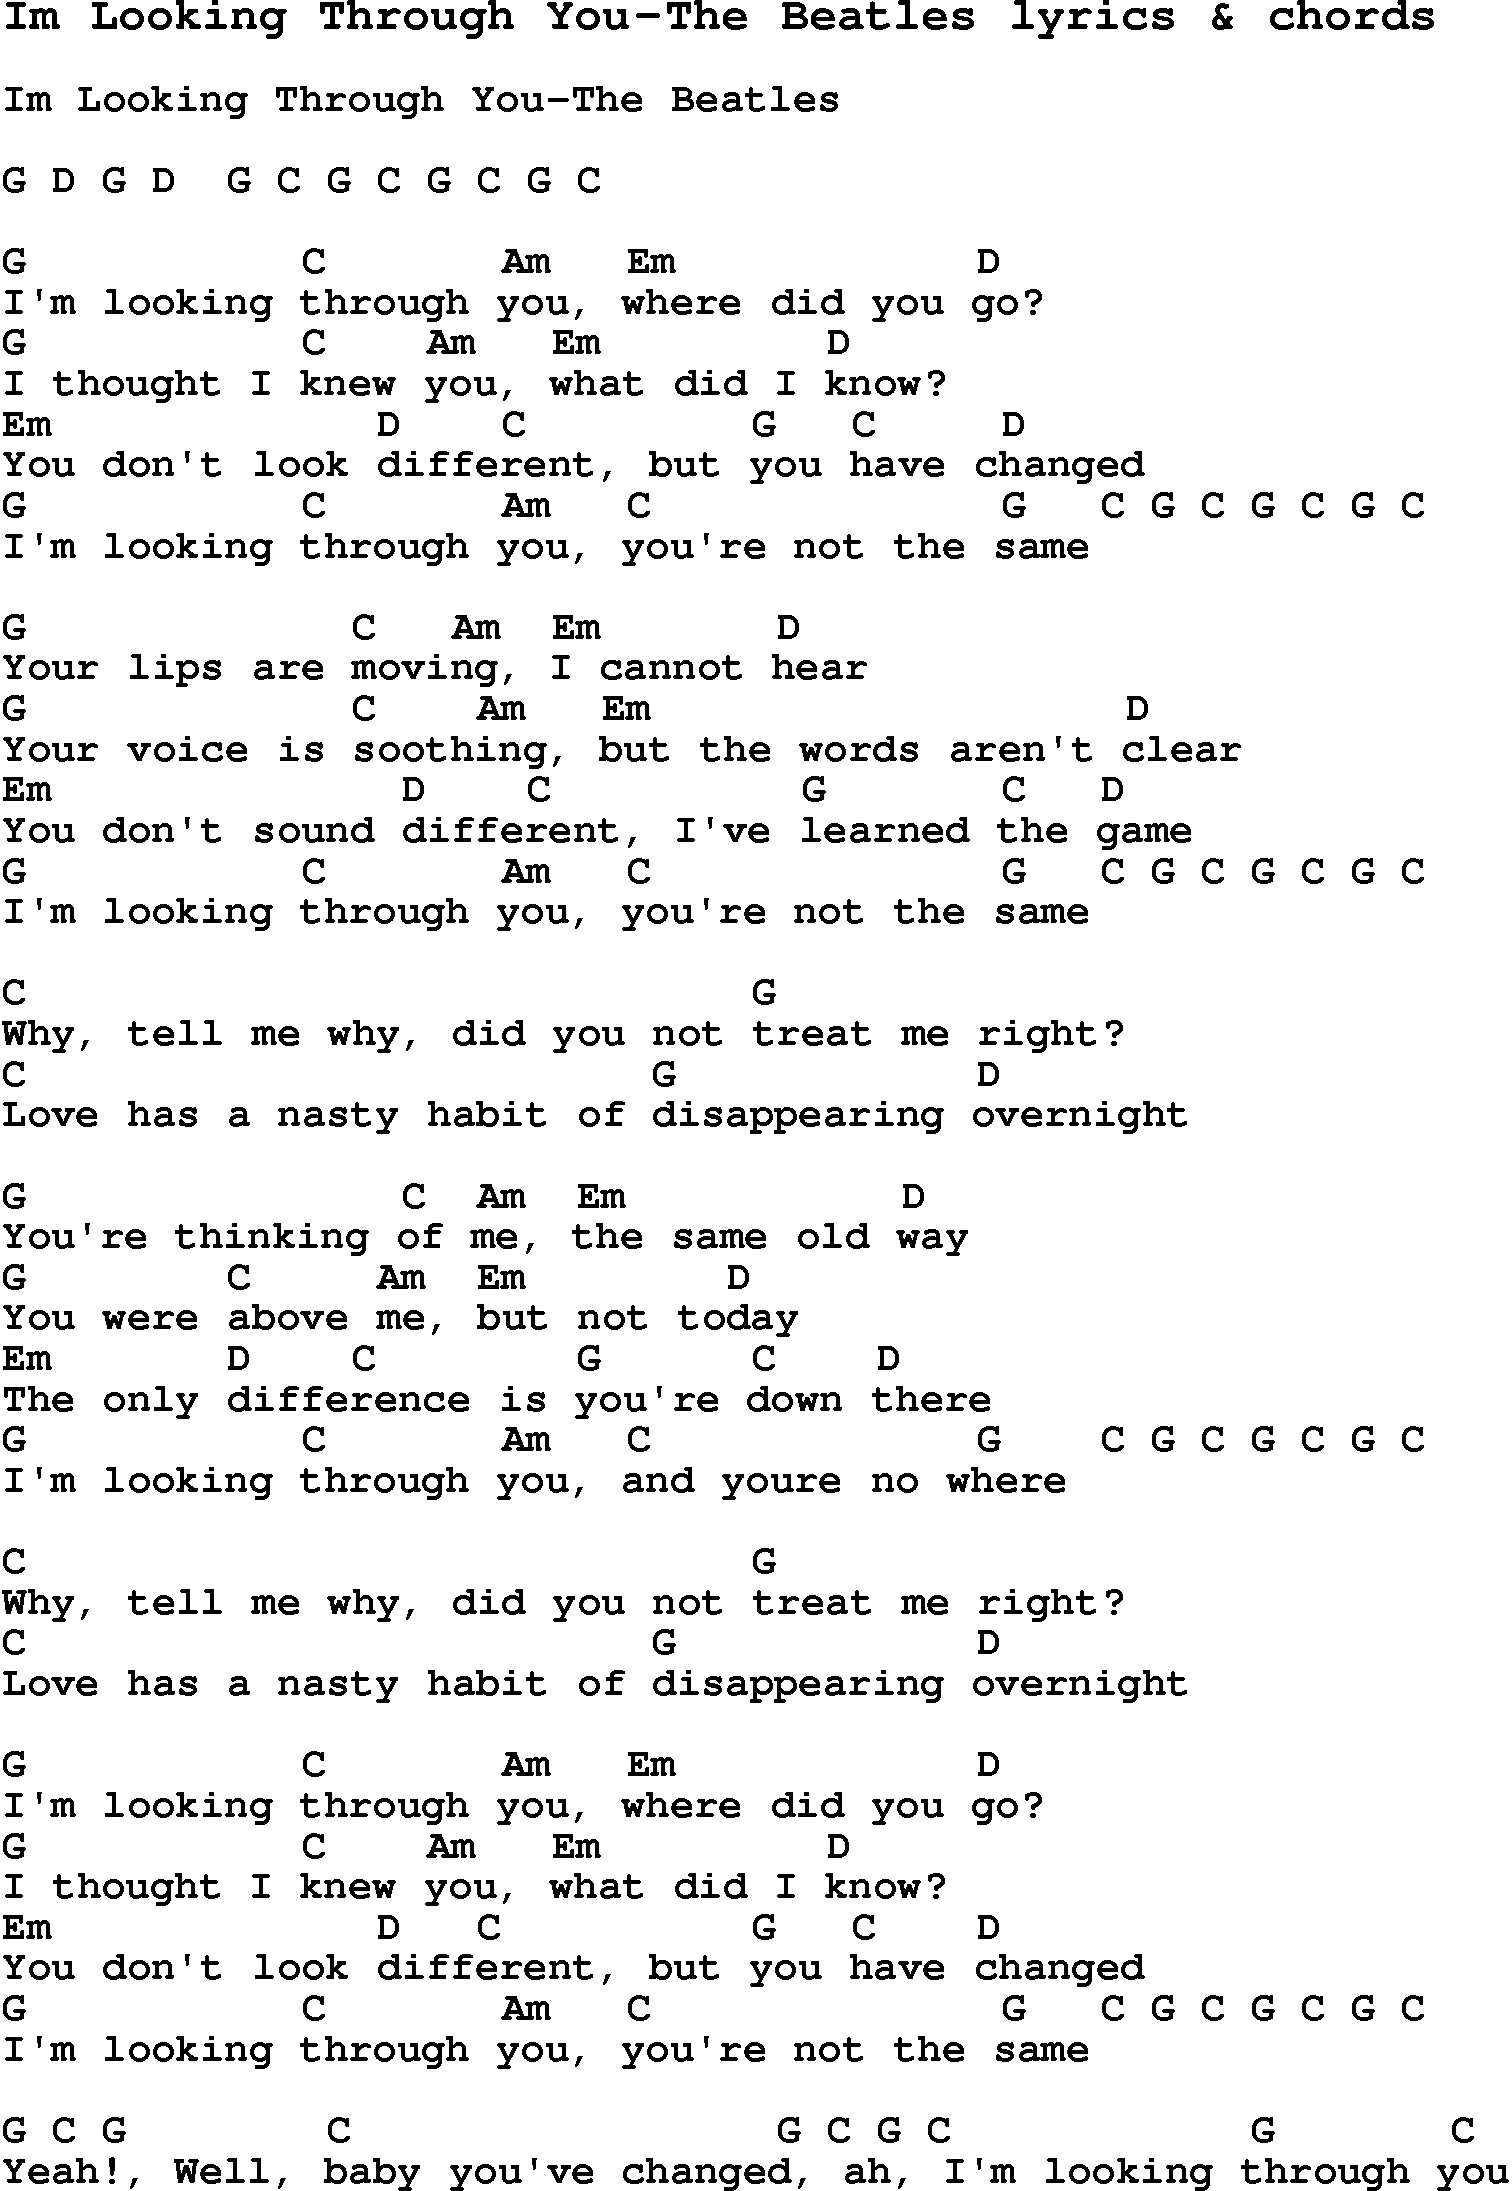 Love Song Lyrics for: Im Looking Through You-The Beatles with chords for Ukulele, Guitar Banjo etc.